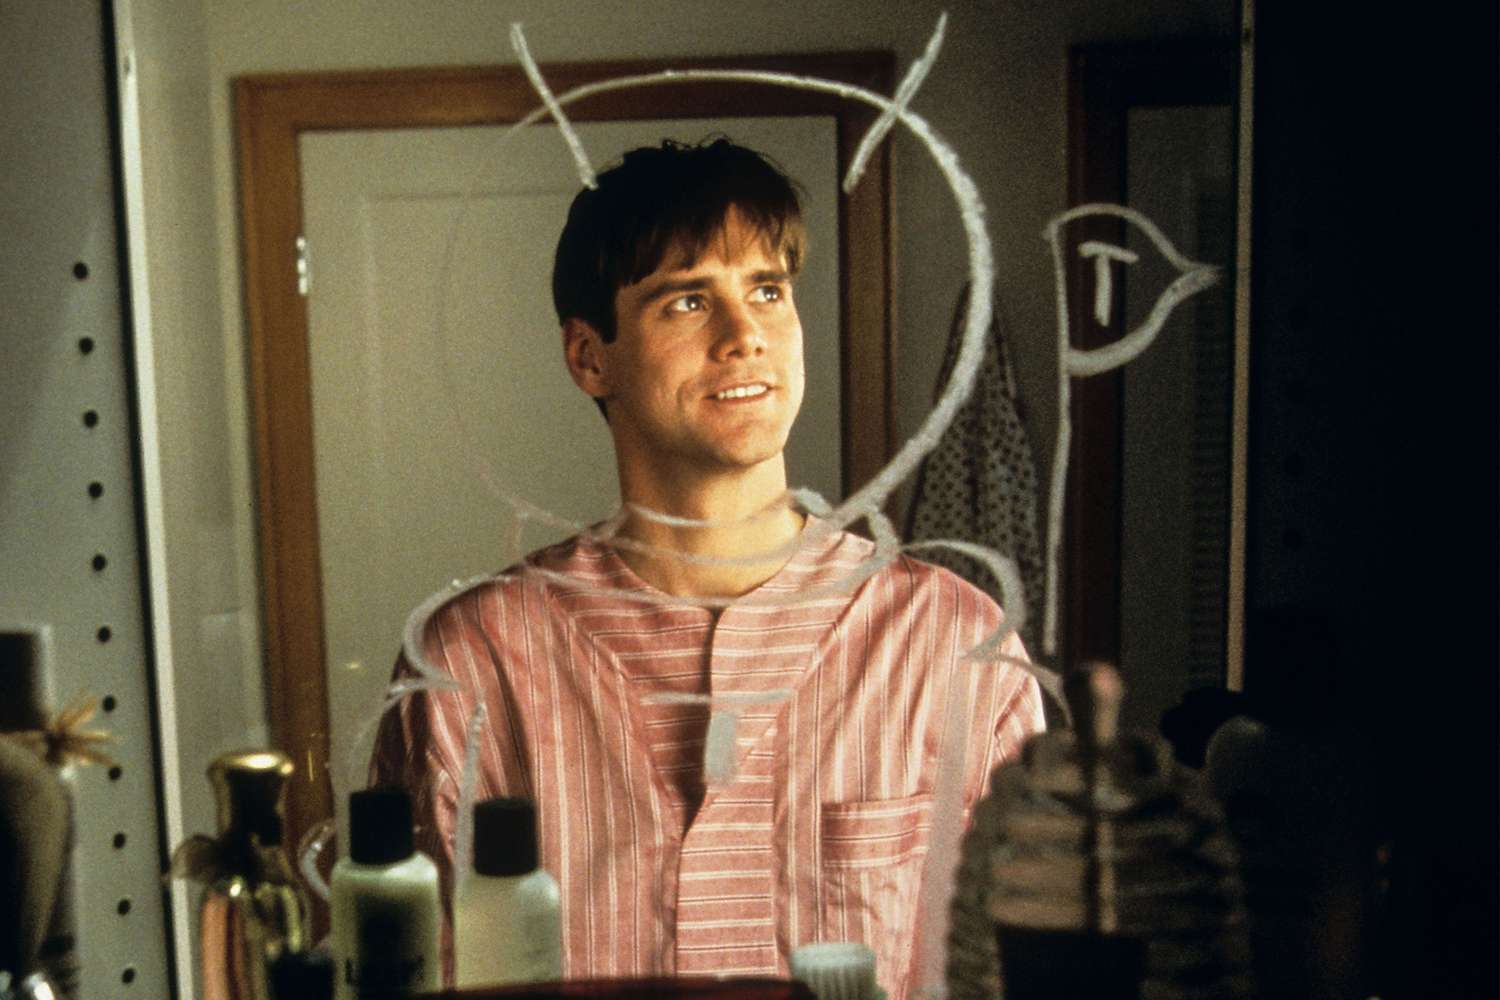 THE TRUMAN SHOW, Jim Carrey, 1998 (image upgraded to 17.5 x 11.9 in)